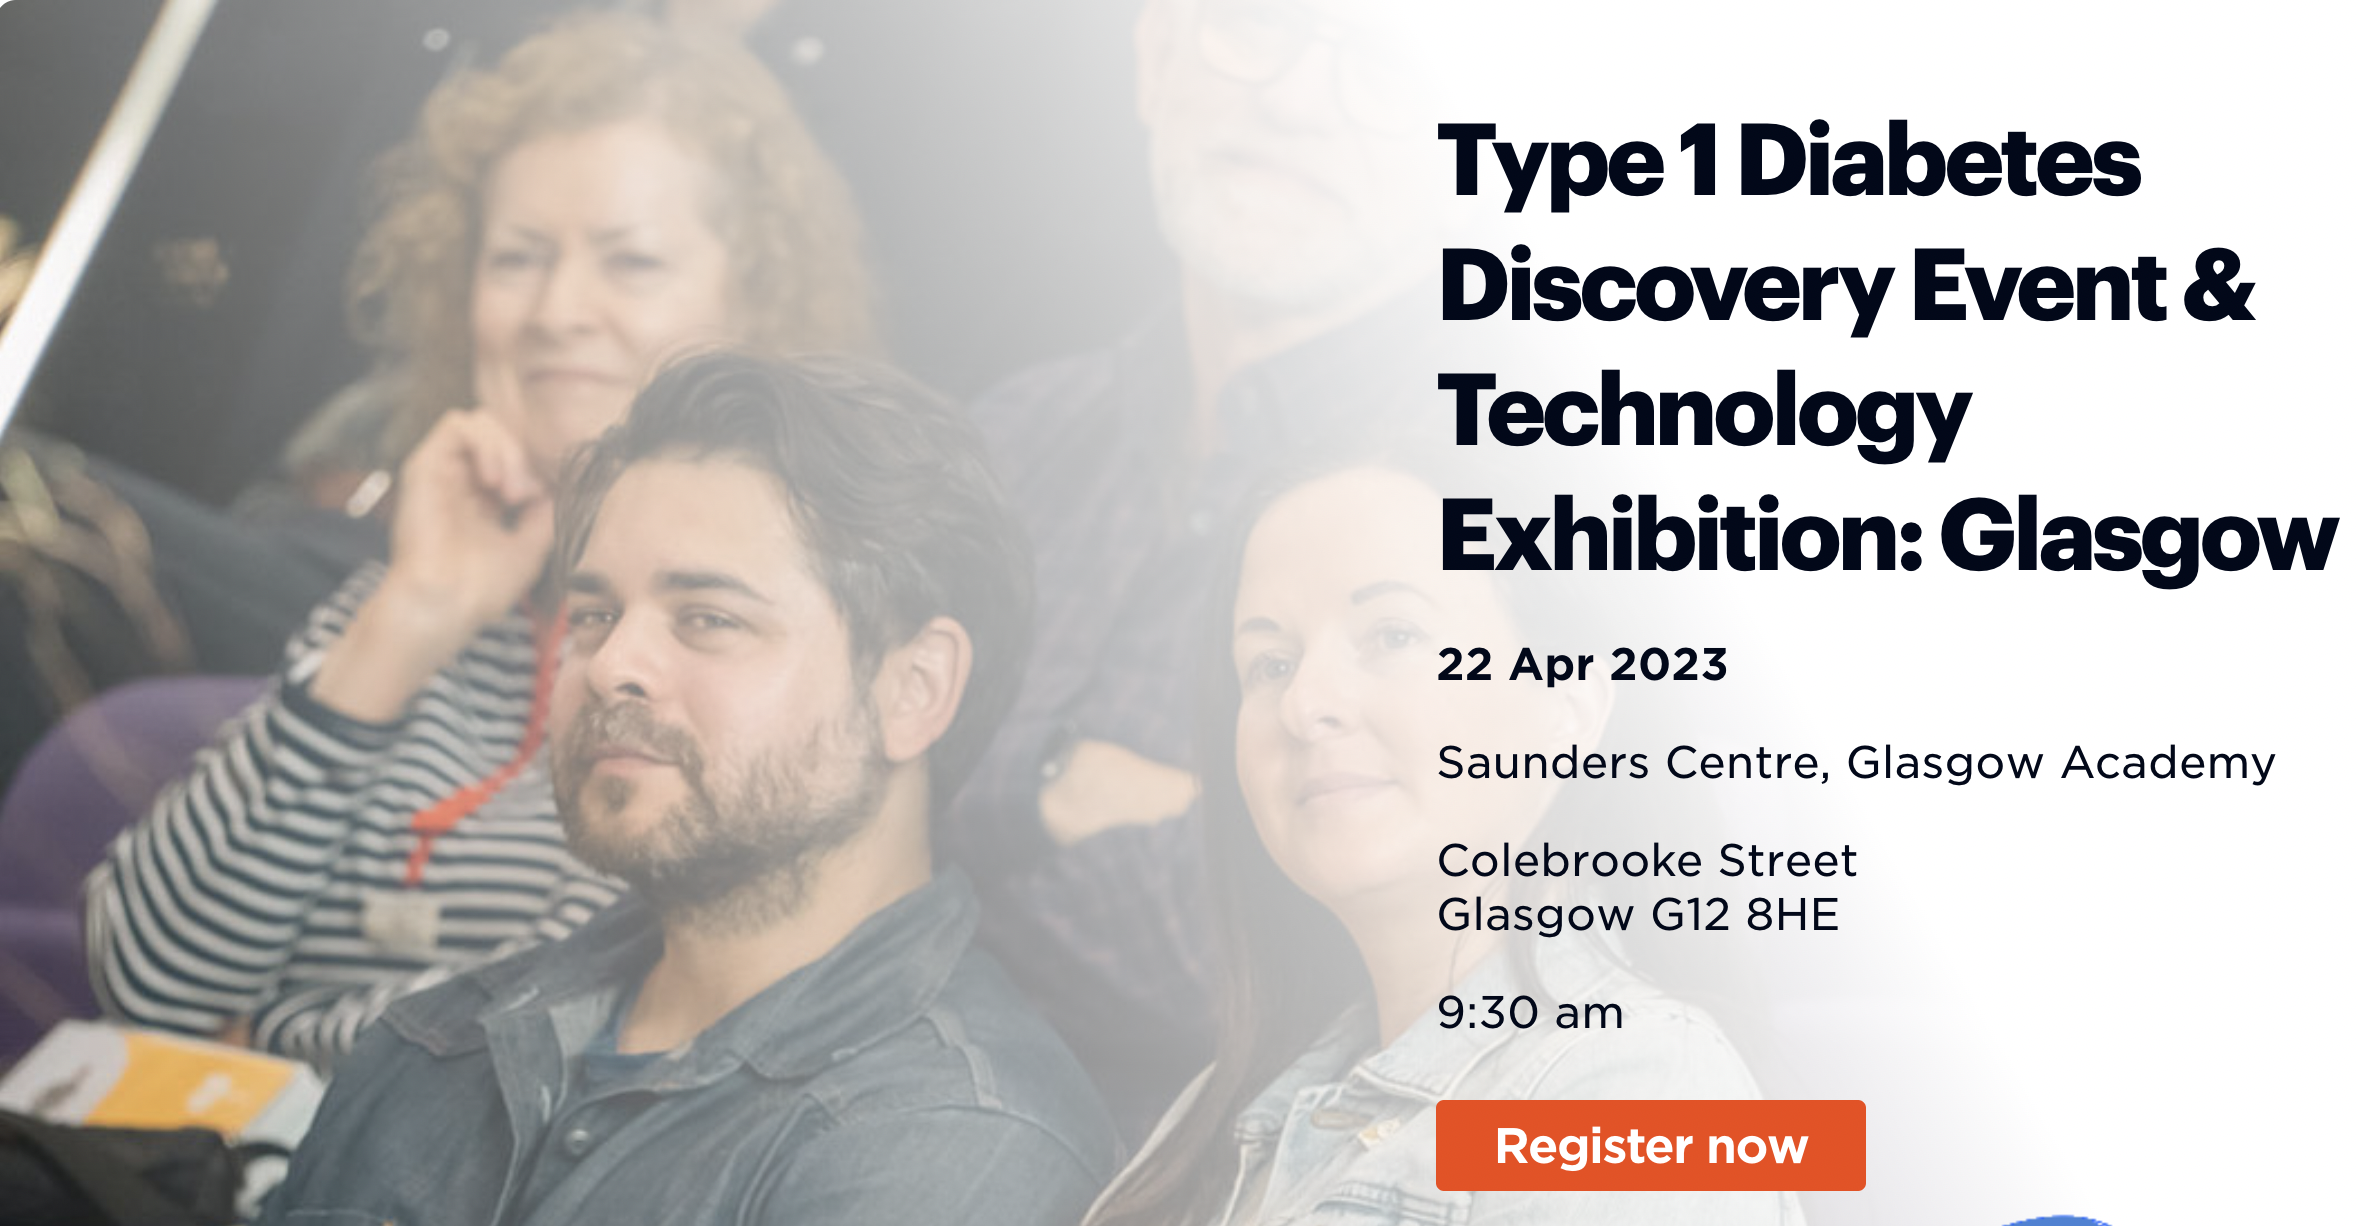 JDRF Discovery Event & Technology Exhibition: Glasgow